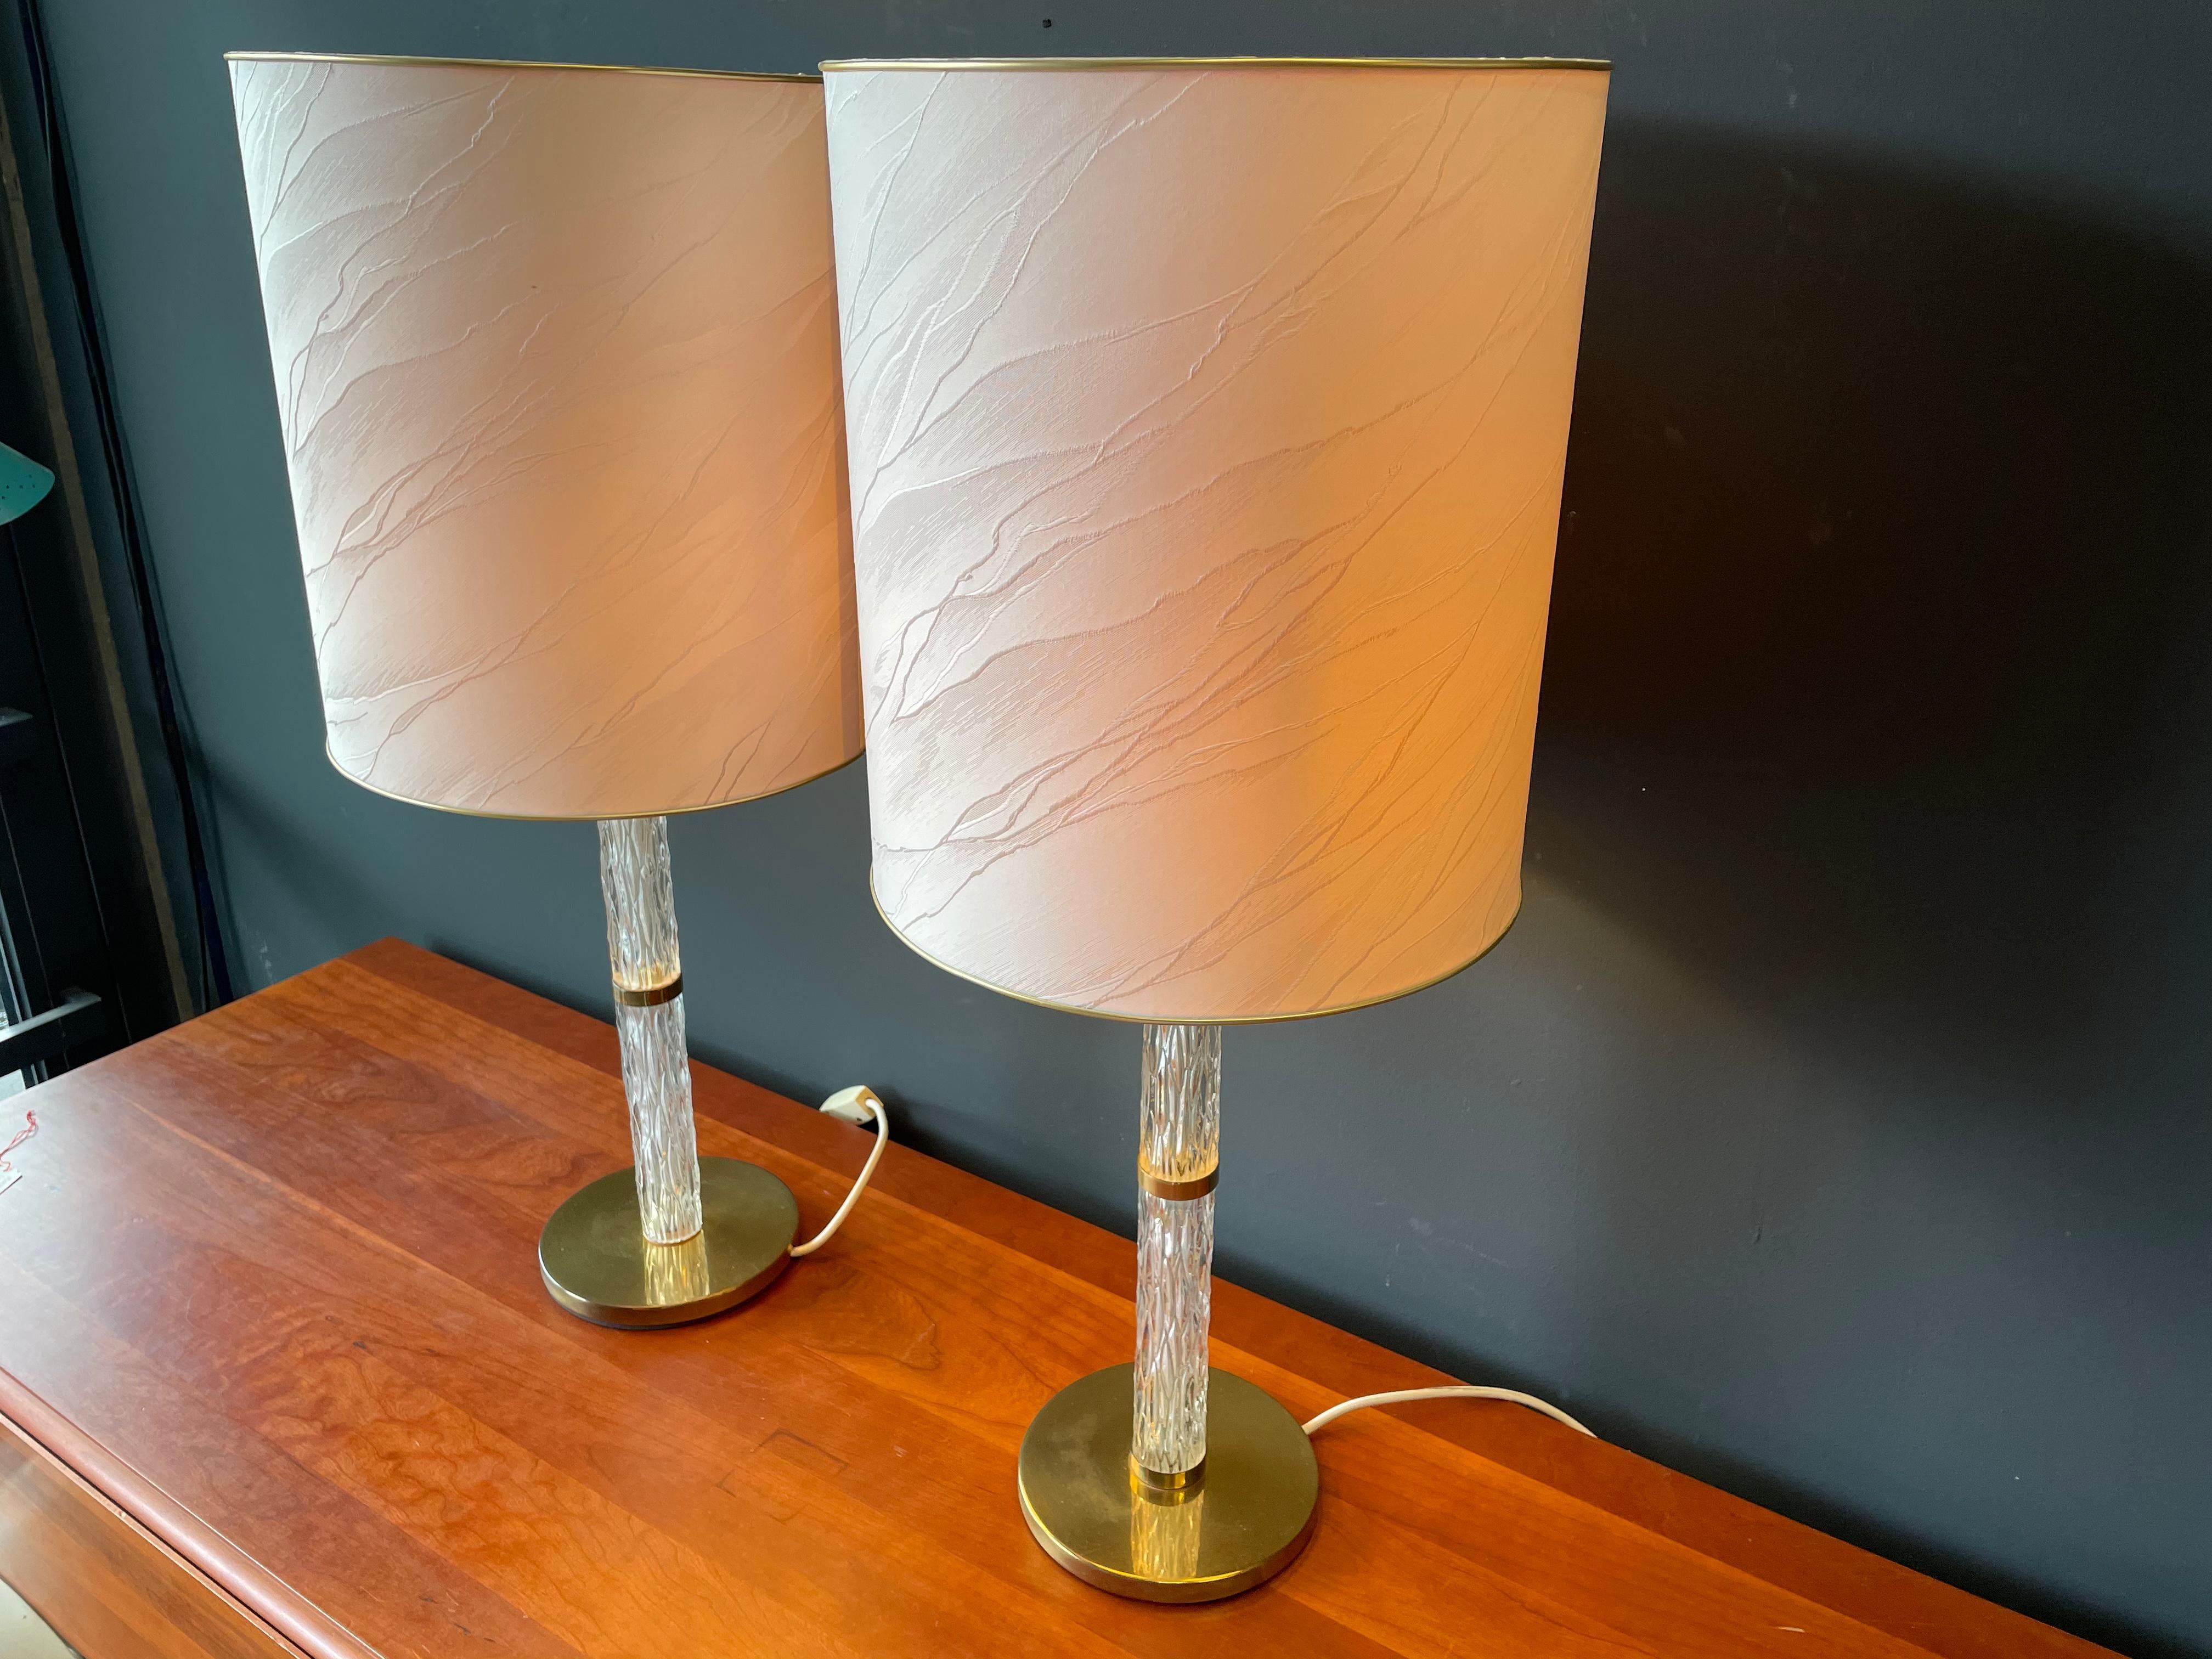 Hollywood Regency table lamps by Kaiser with ice glass base.
The lamps are from the years around 1965 to 1970. The special feature of this pair of lamps and typical of this period are their lamp bases. These are textured glass with polished brass